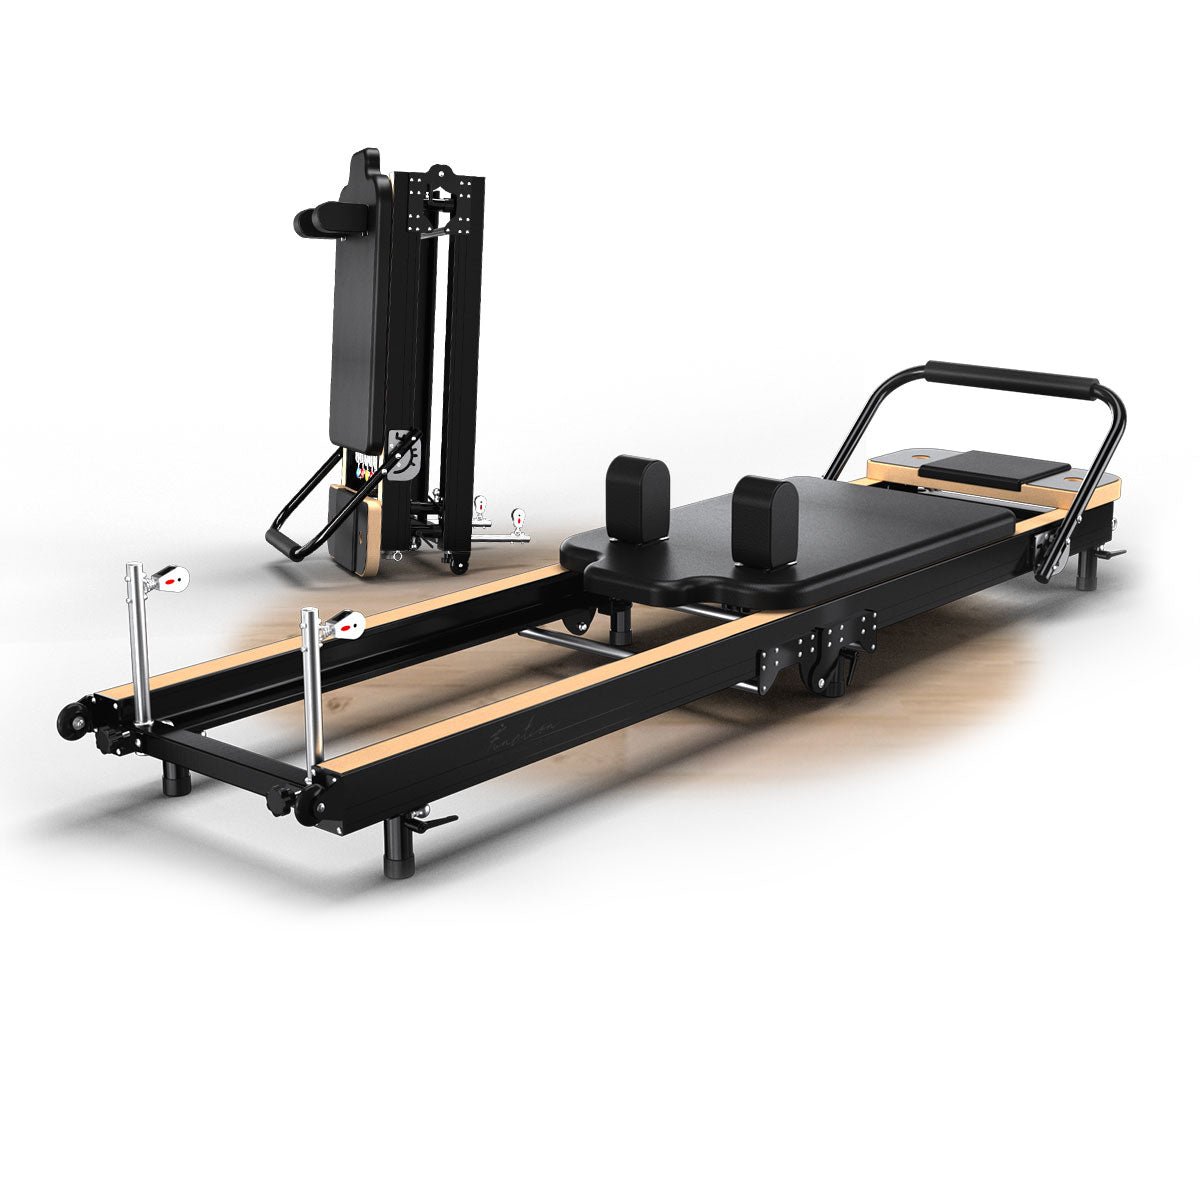 Faittd Foldable Pilates Machine & Equipment - Pilates Reformer Workout  Machine for Home Gym with Reformer Accessories, Reformer Box, Padded Jump  Board - Up to 3…